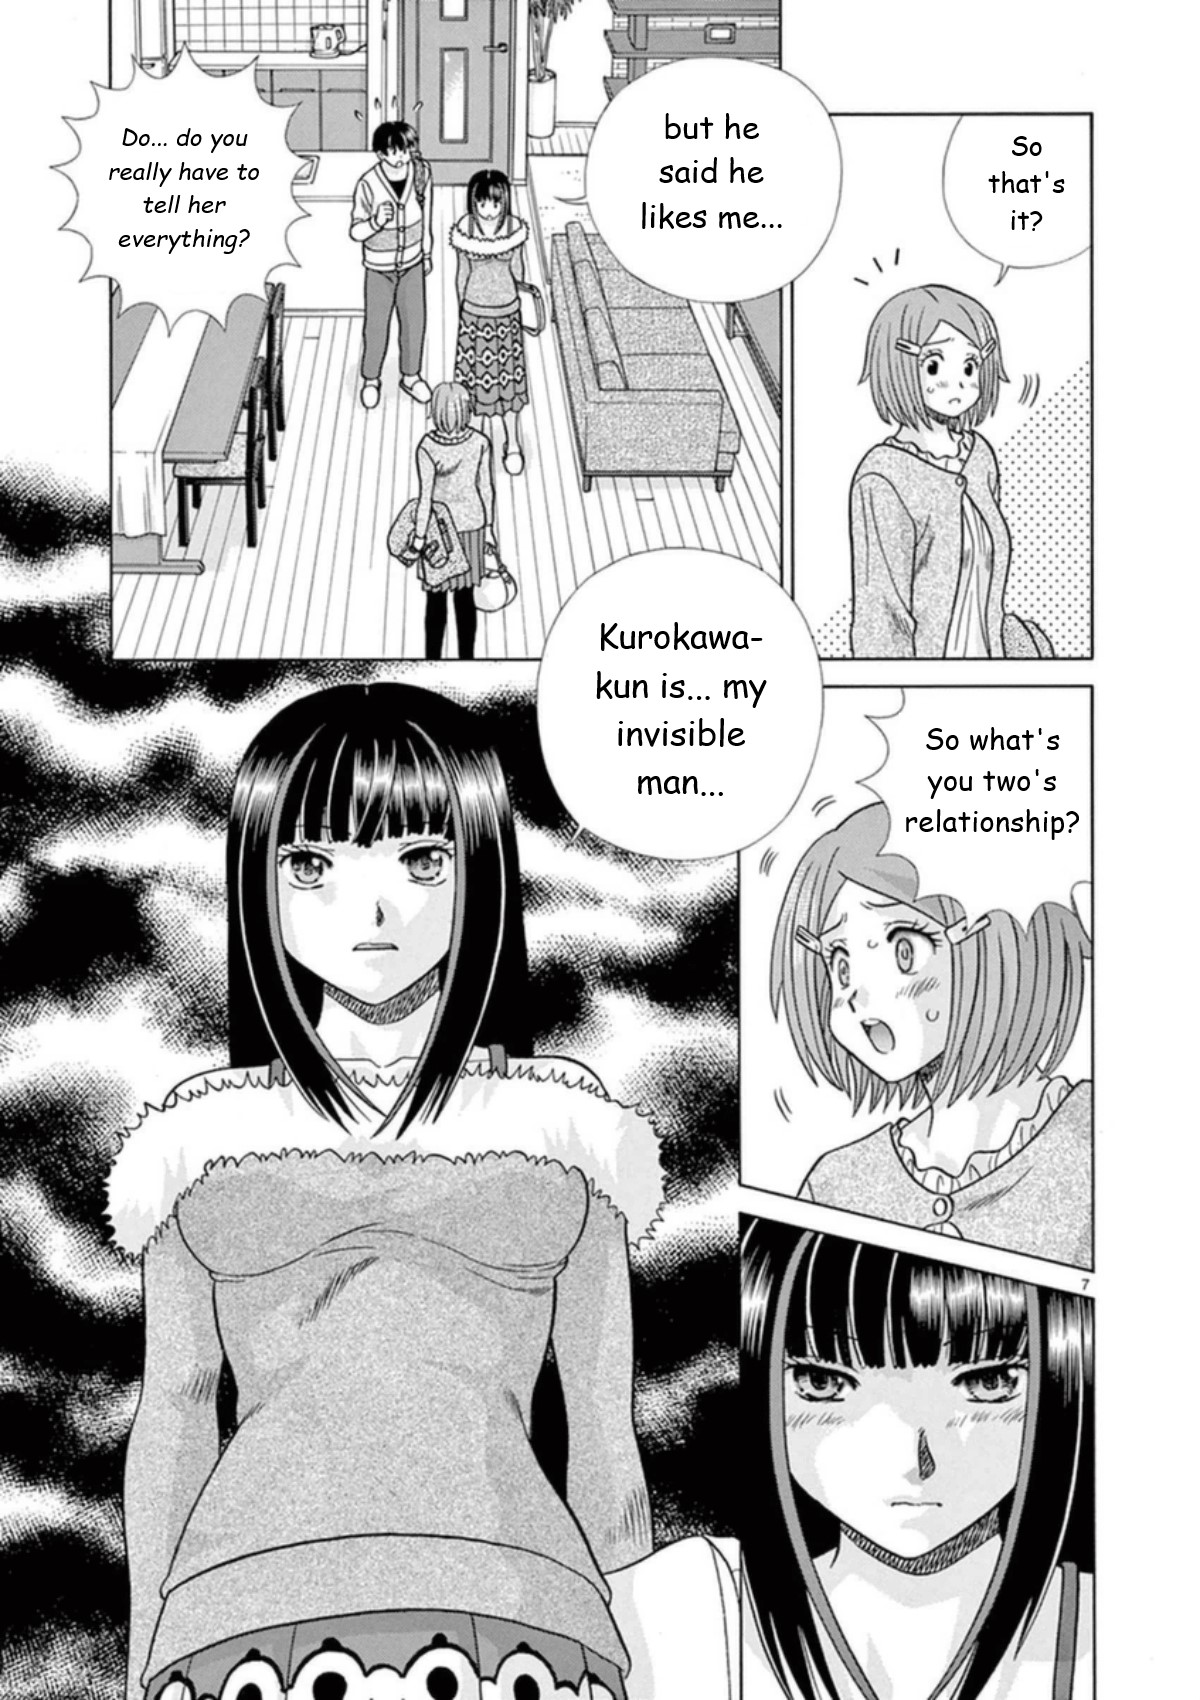 Toumei Ningen Kyoutei Vol. 4 Ch. 27 I Will Be the Invisible Person